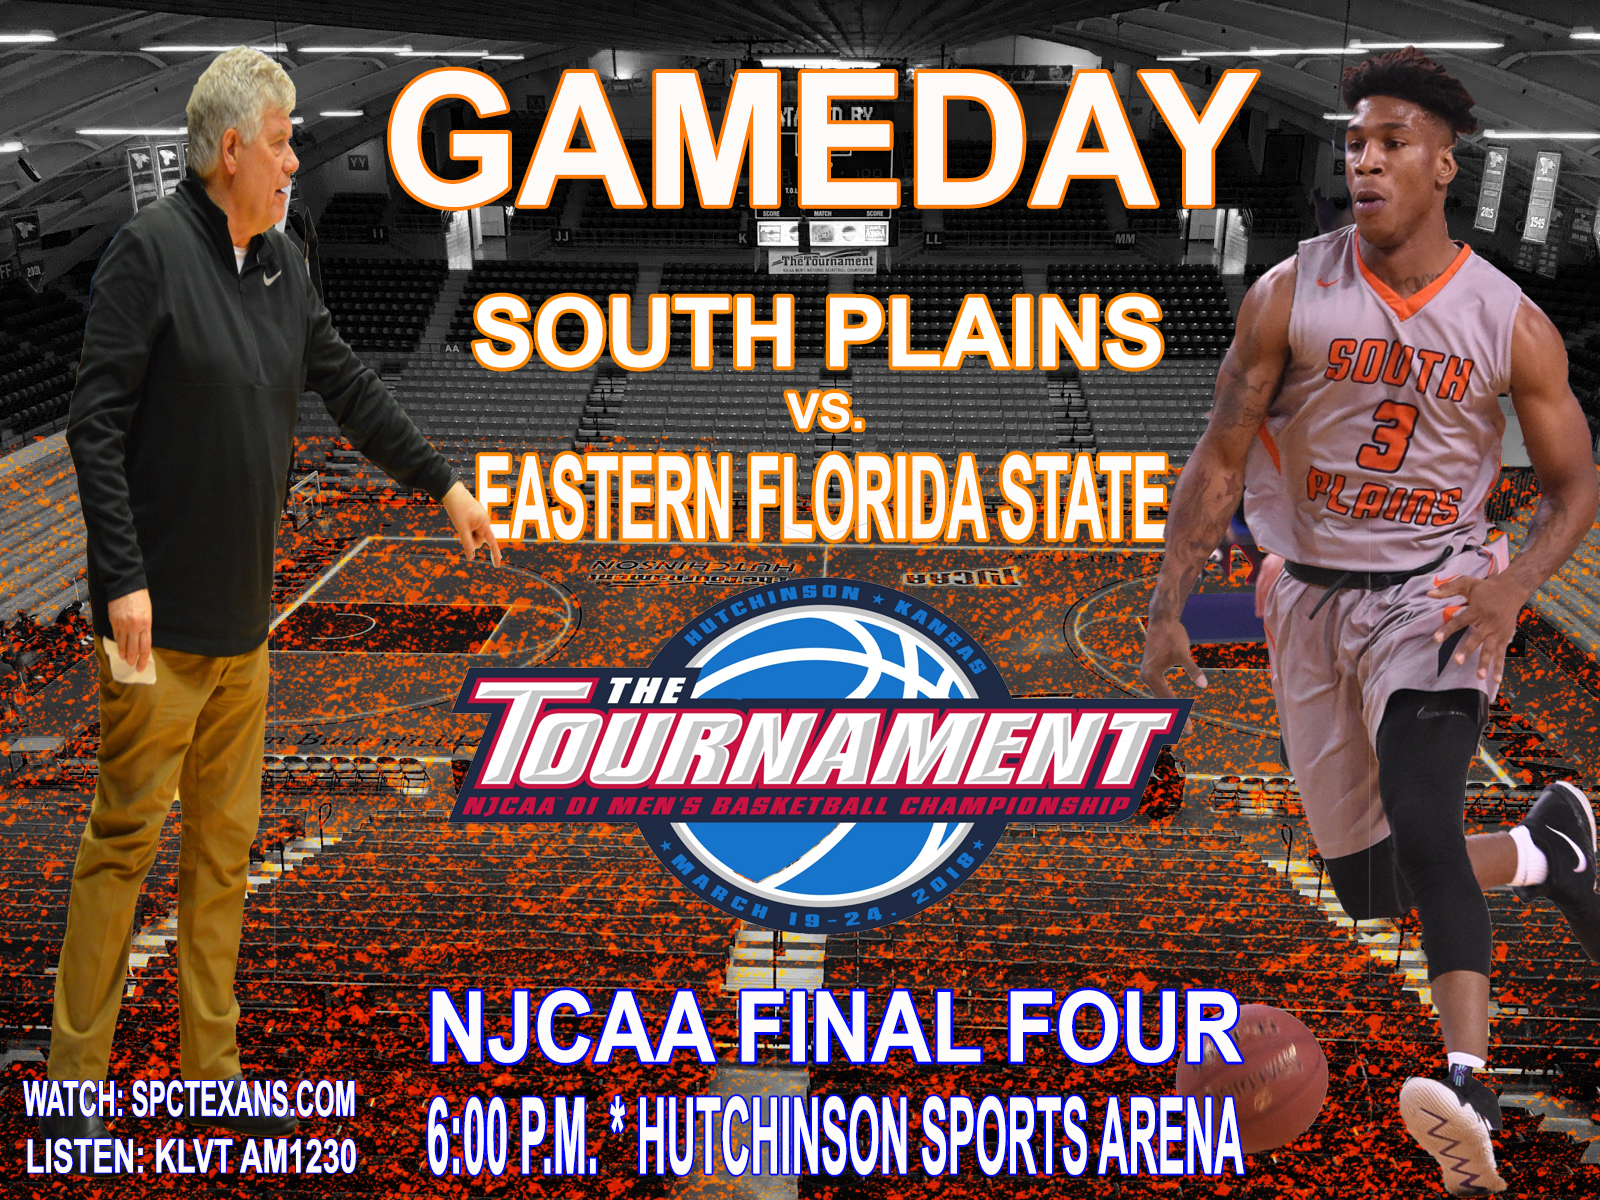 South Plains vs. Eastern Florida State Final Four preview